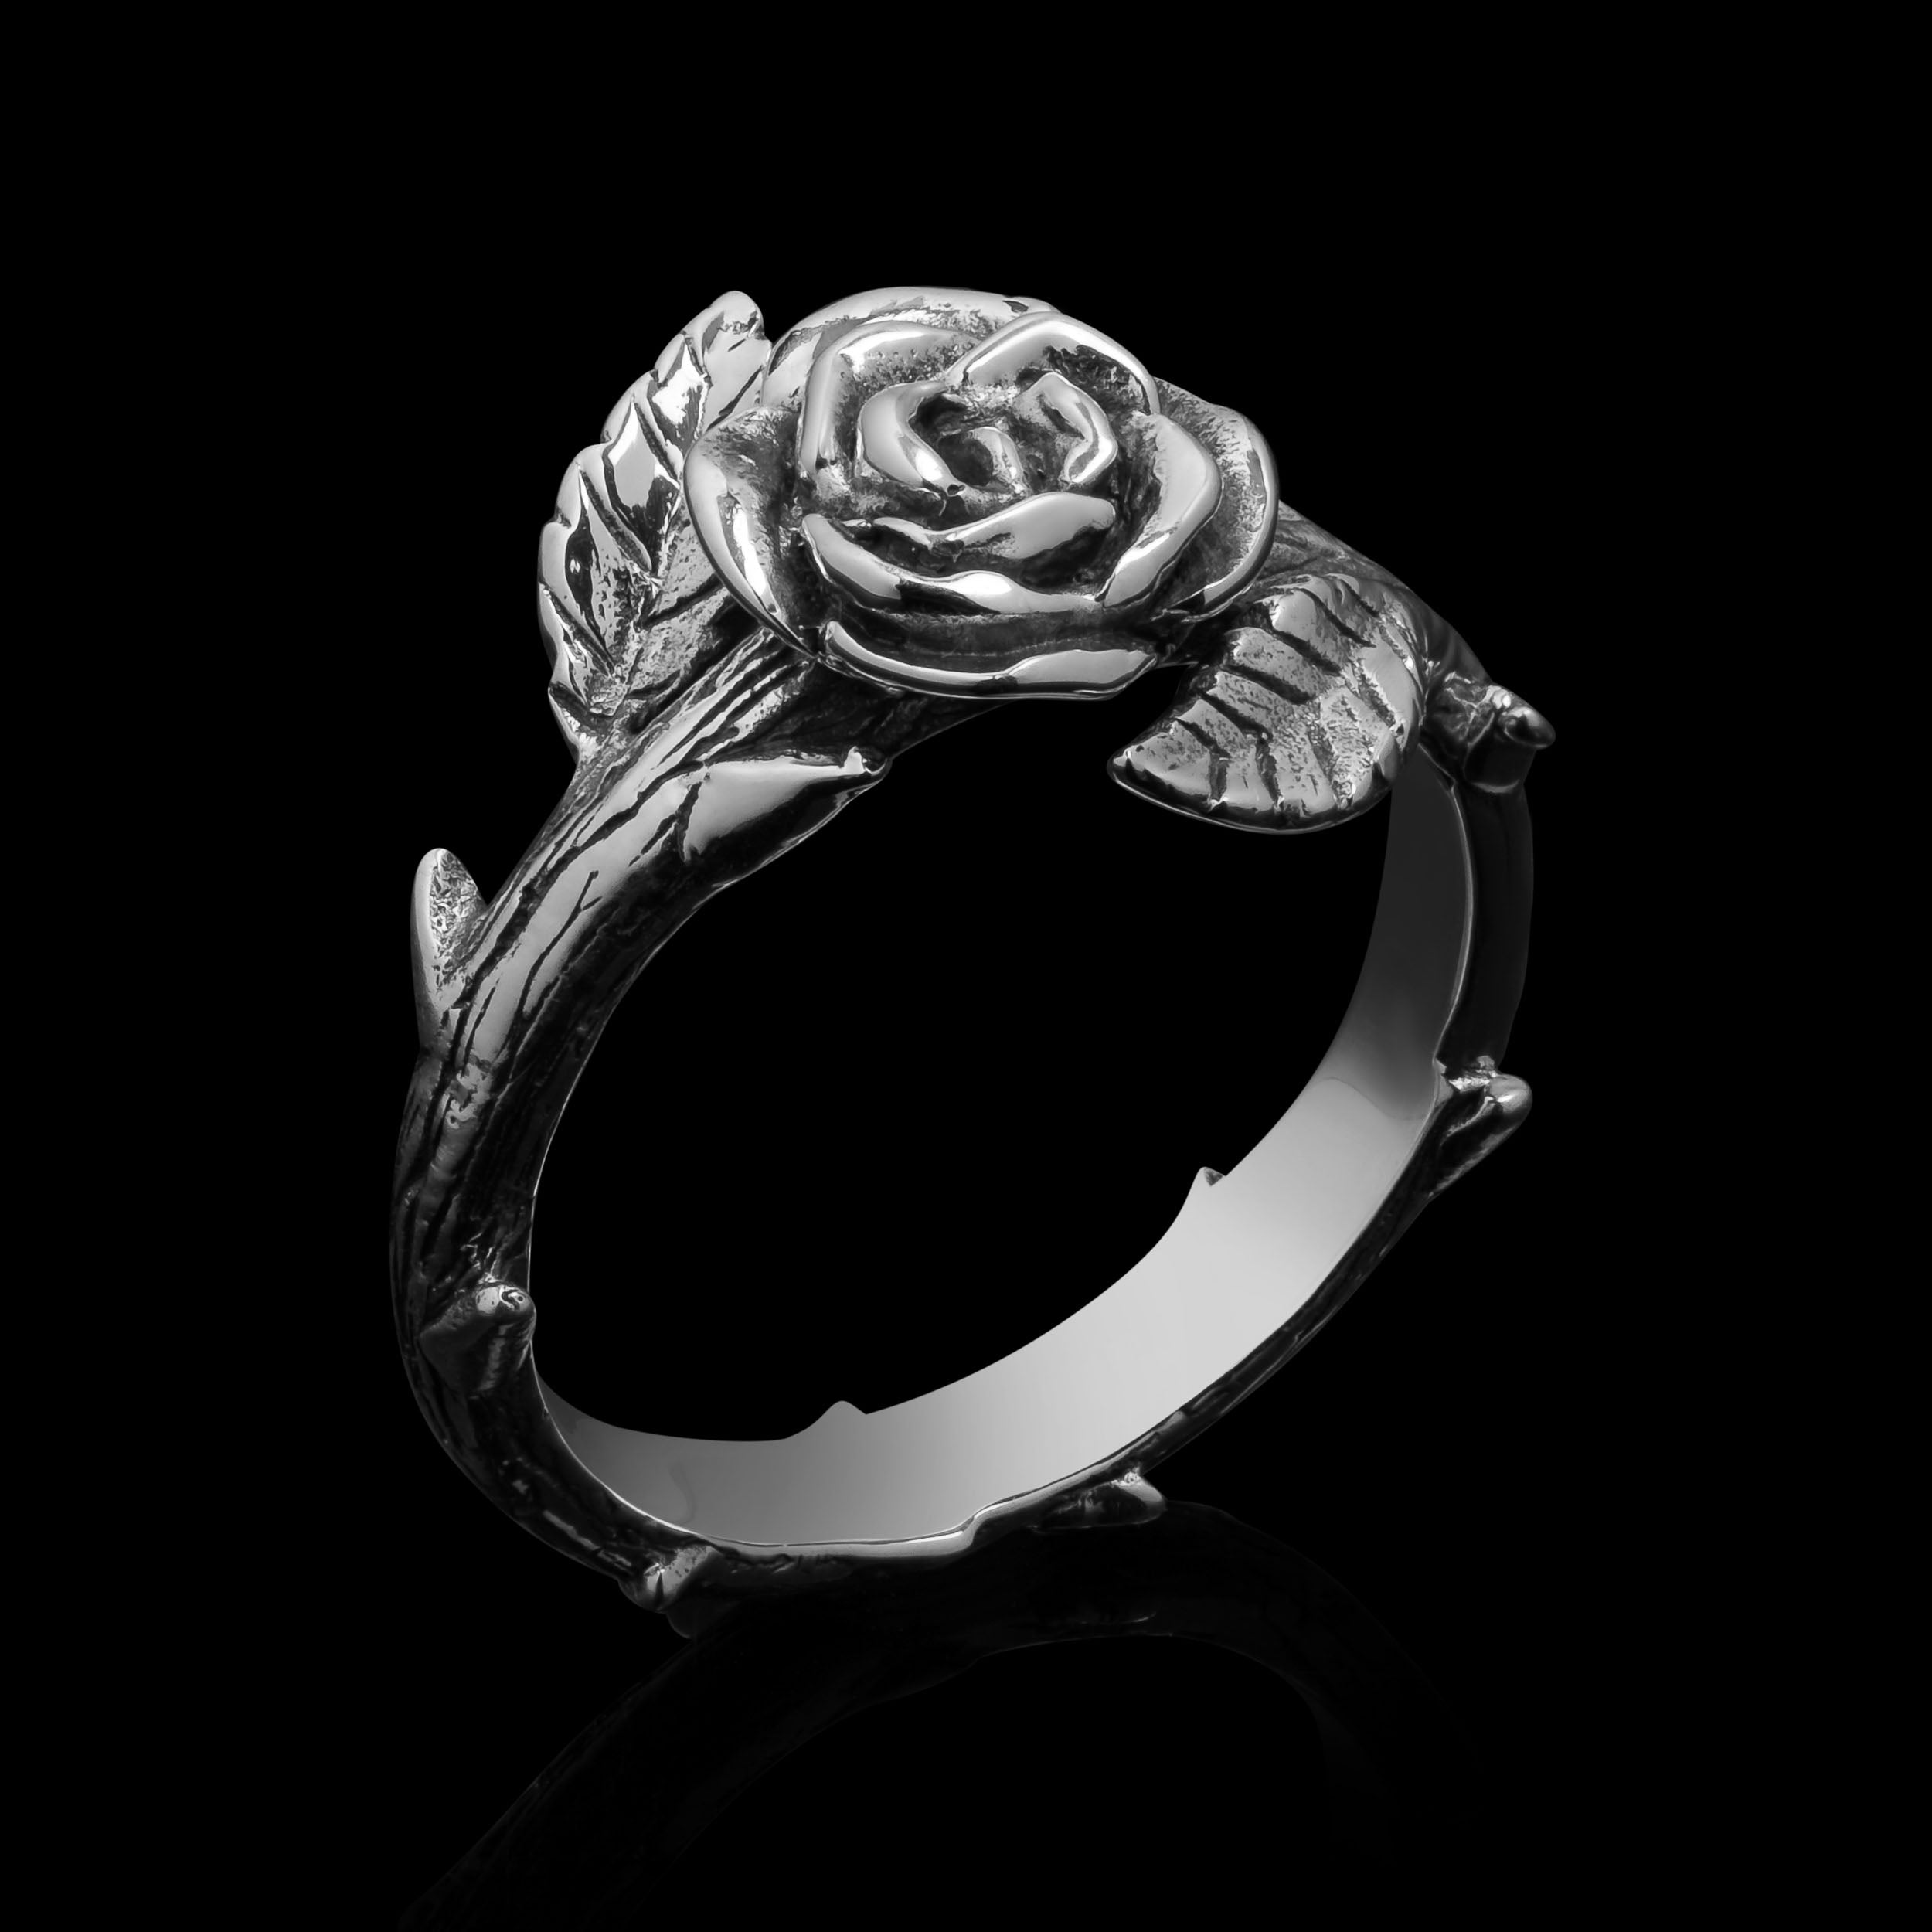 Buy ELLIPSTORE Black Rose Ring With Embedded Cubic Zircon Diamonds, Rings  for Womens | Rings for Girls (6) at Amazon.in